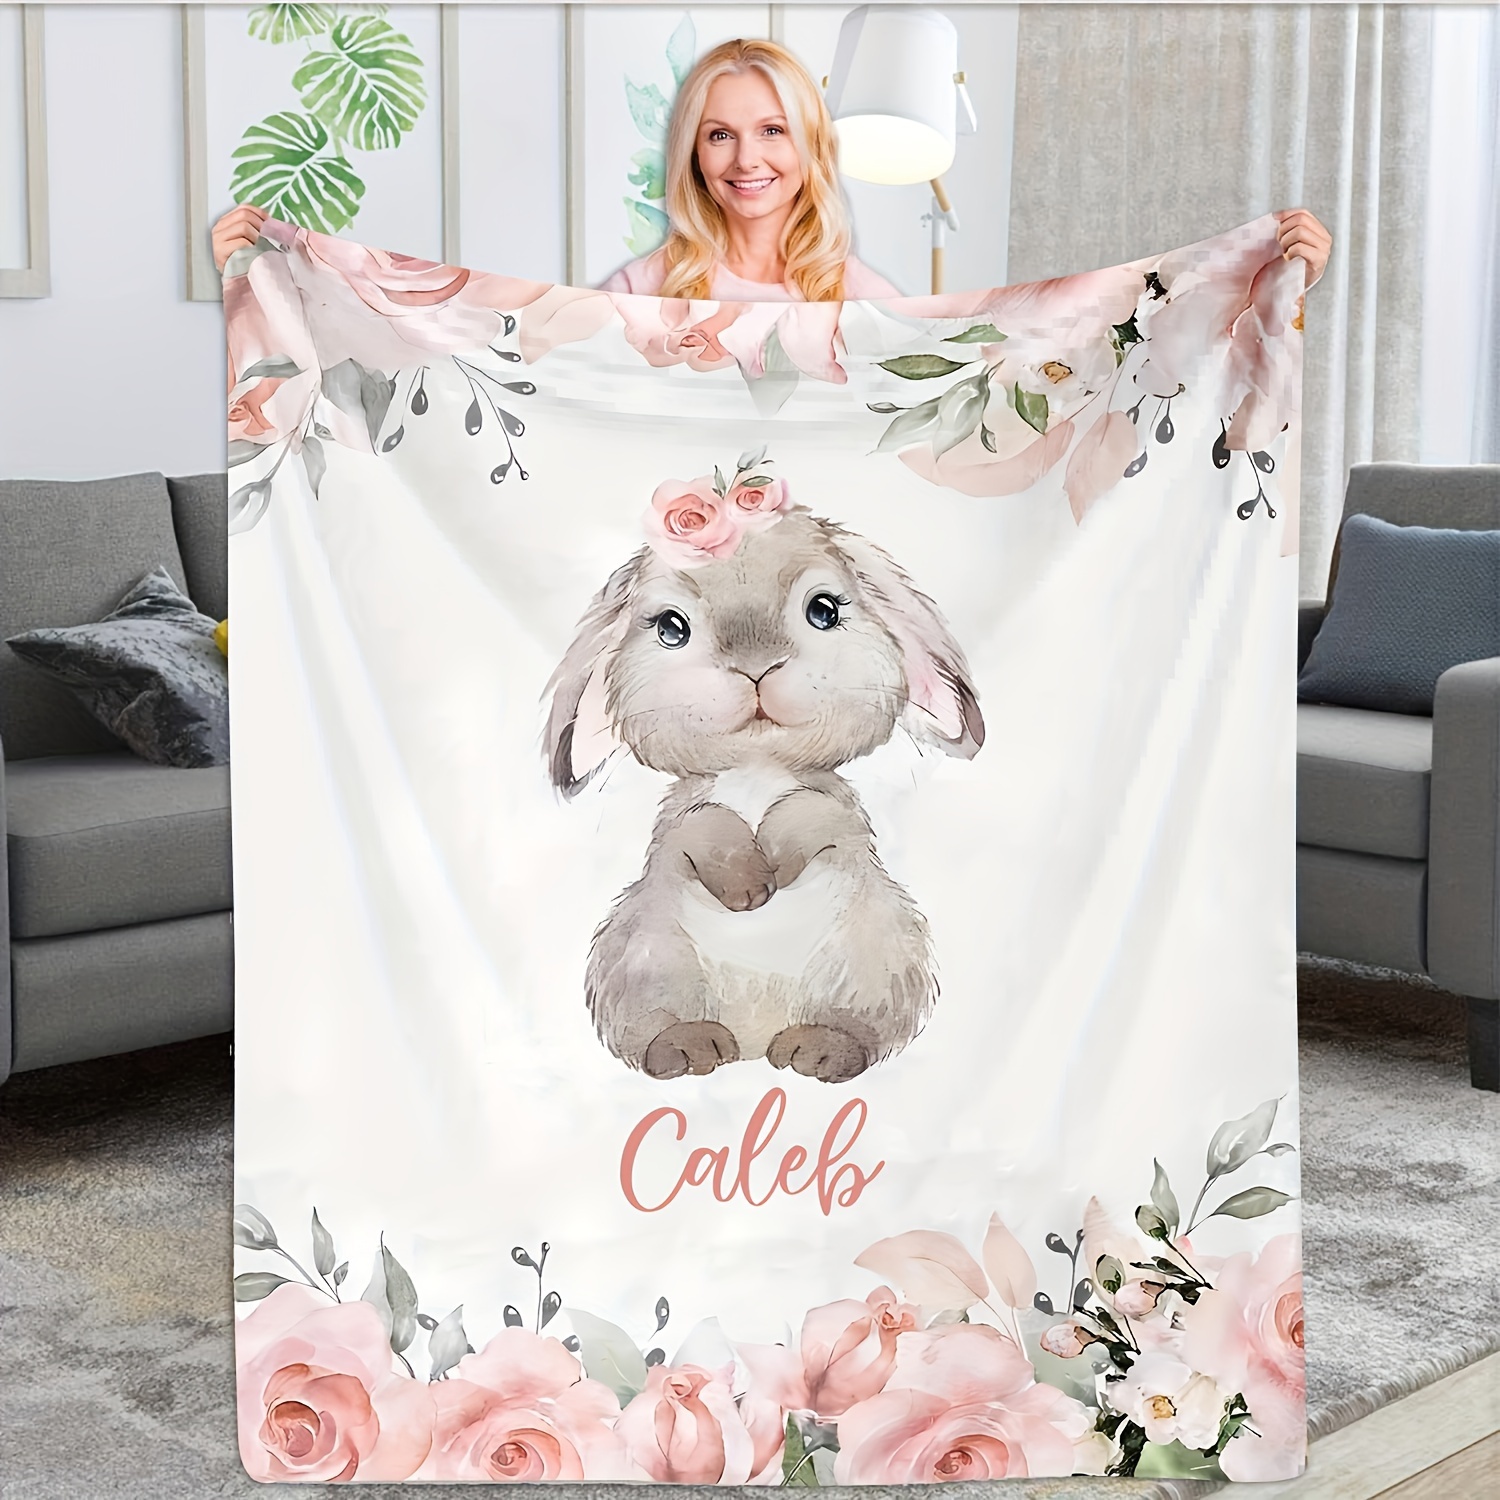 

Personalized Name Blanket: Customizable Fleece Throw With Adorable Bunny Design - Perfect Gift For Any Occasion